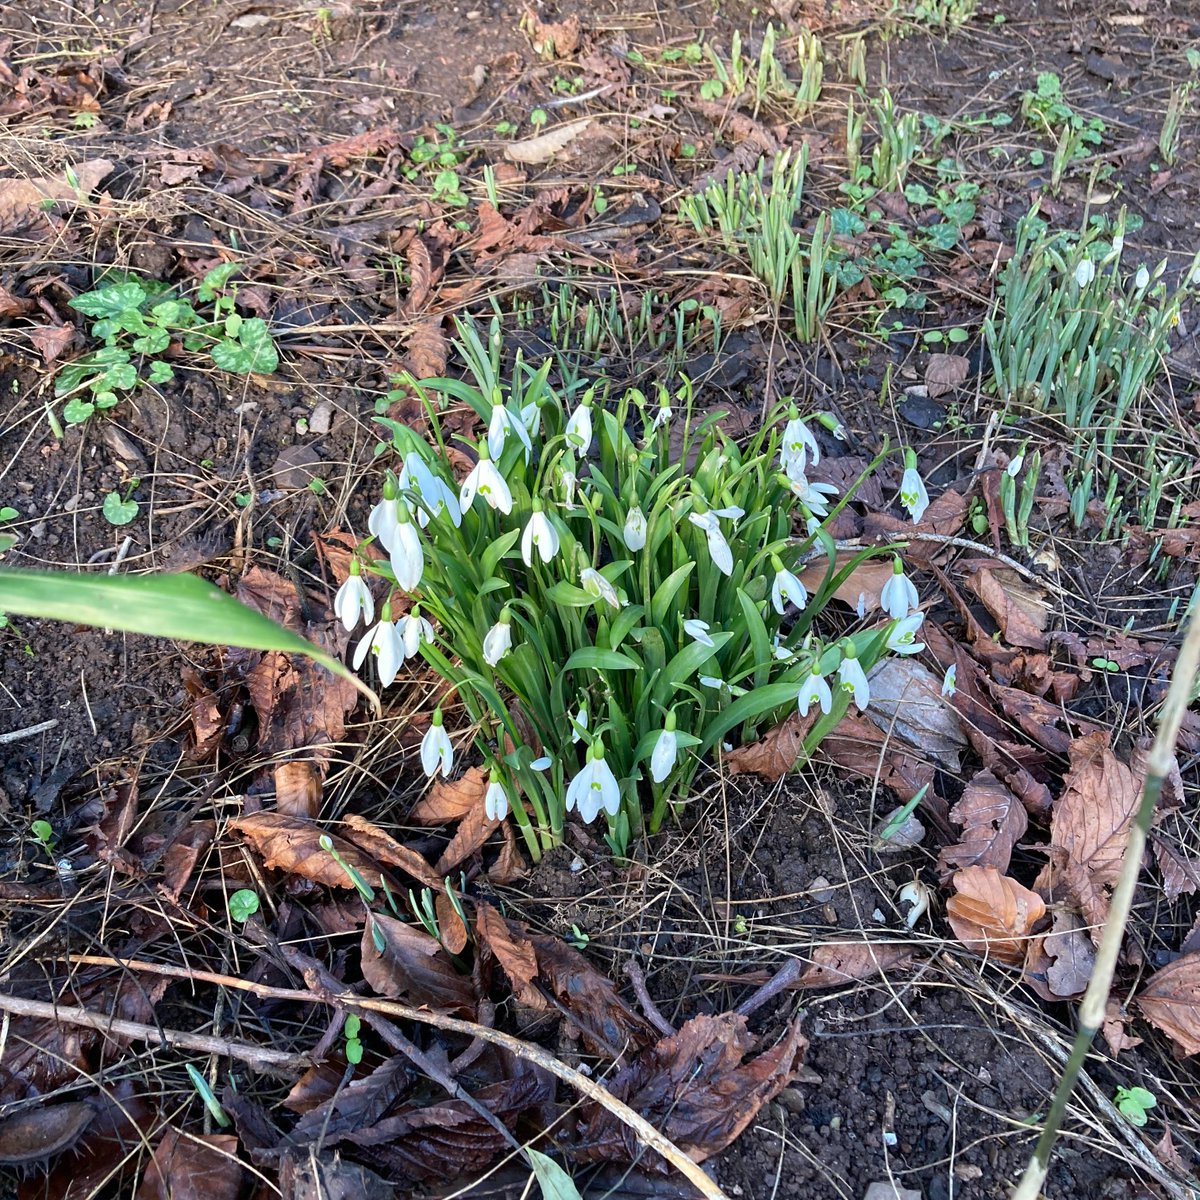 Due to the wet and mild weather recently, we have already spotted some snowdrops appearing near Rook Wood.

Let us know if you spot them on your next visit to Hestercombe.

#snowdrops #flowering #nature #environment #hestercombegardens